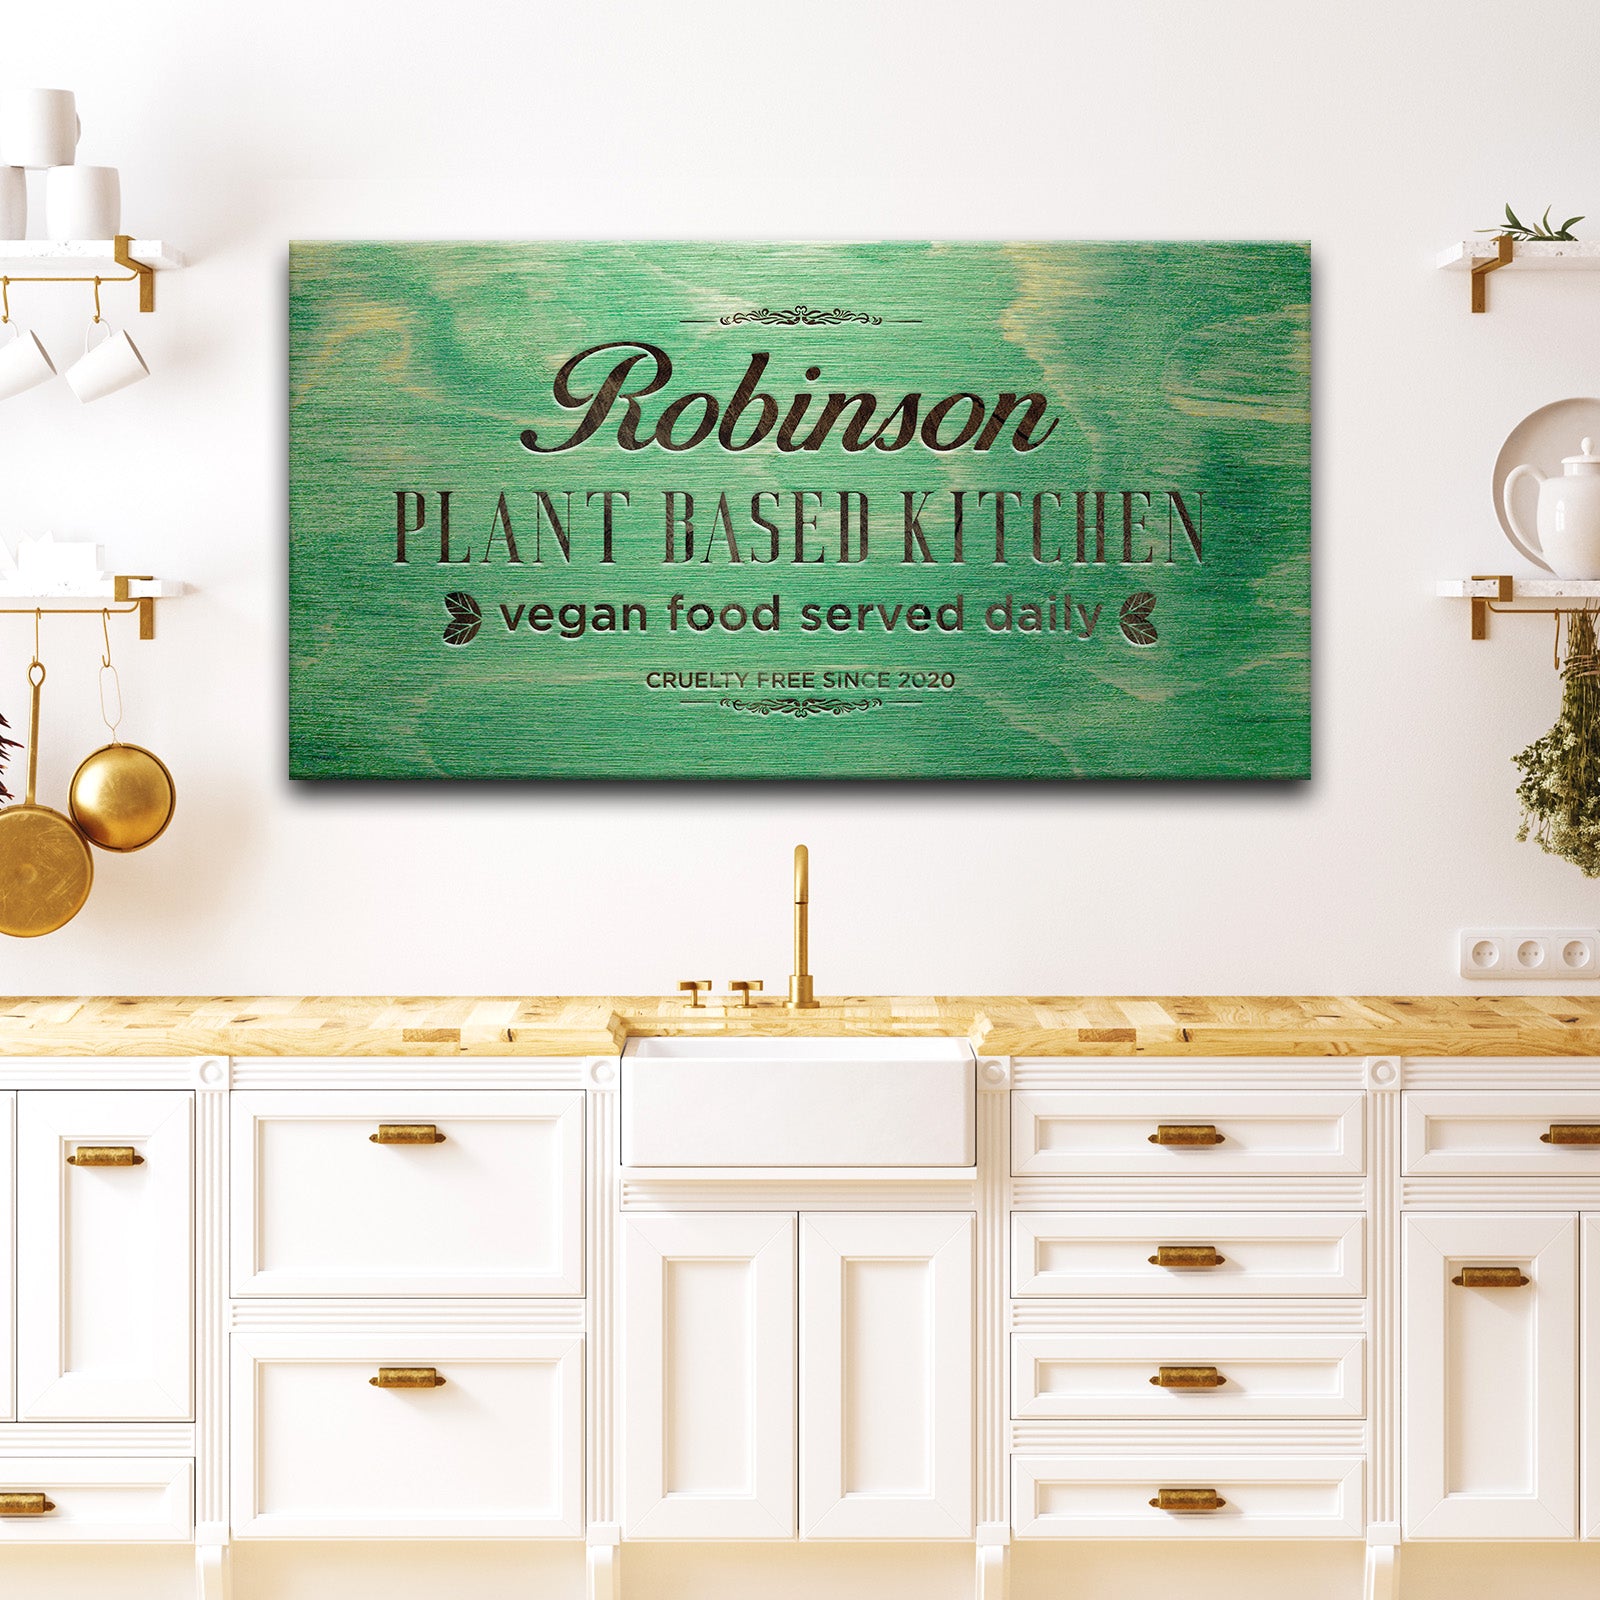 Plant Based Kitchen Sign - Image by Tailored Canvases